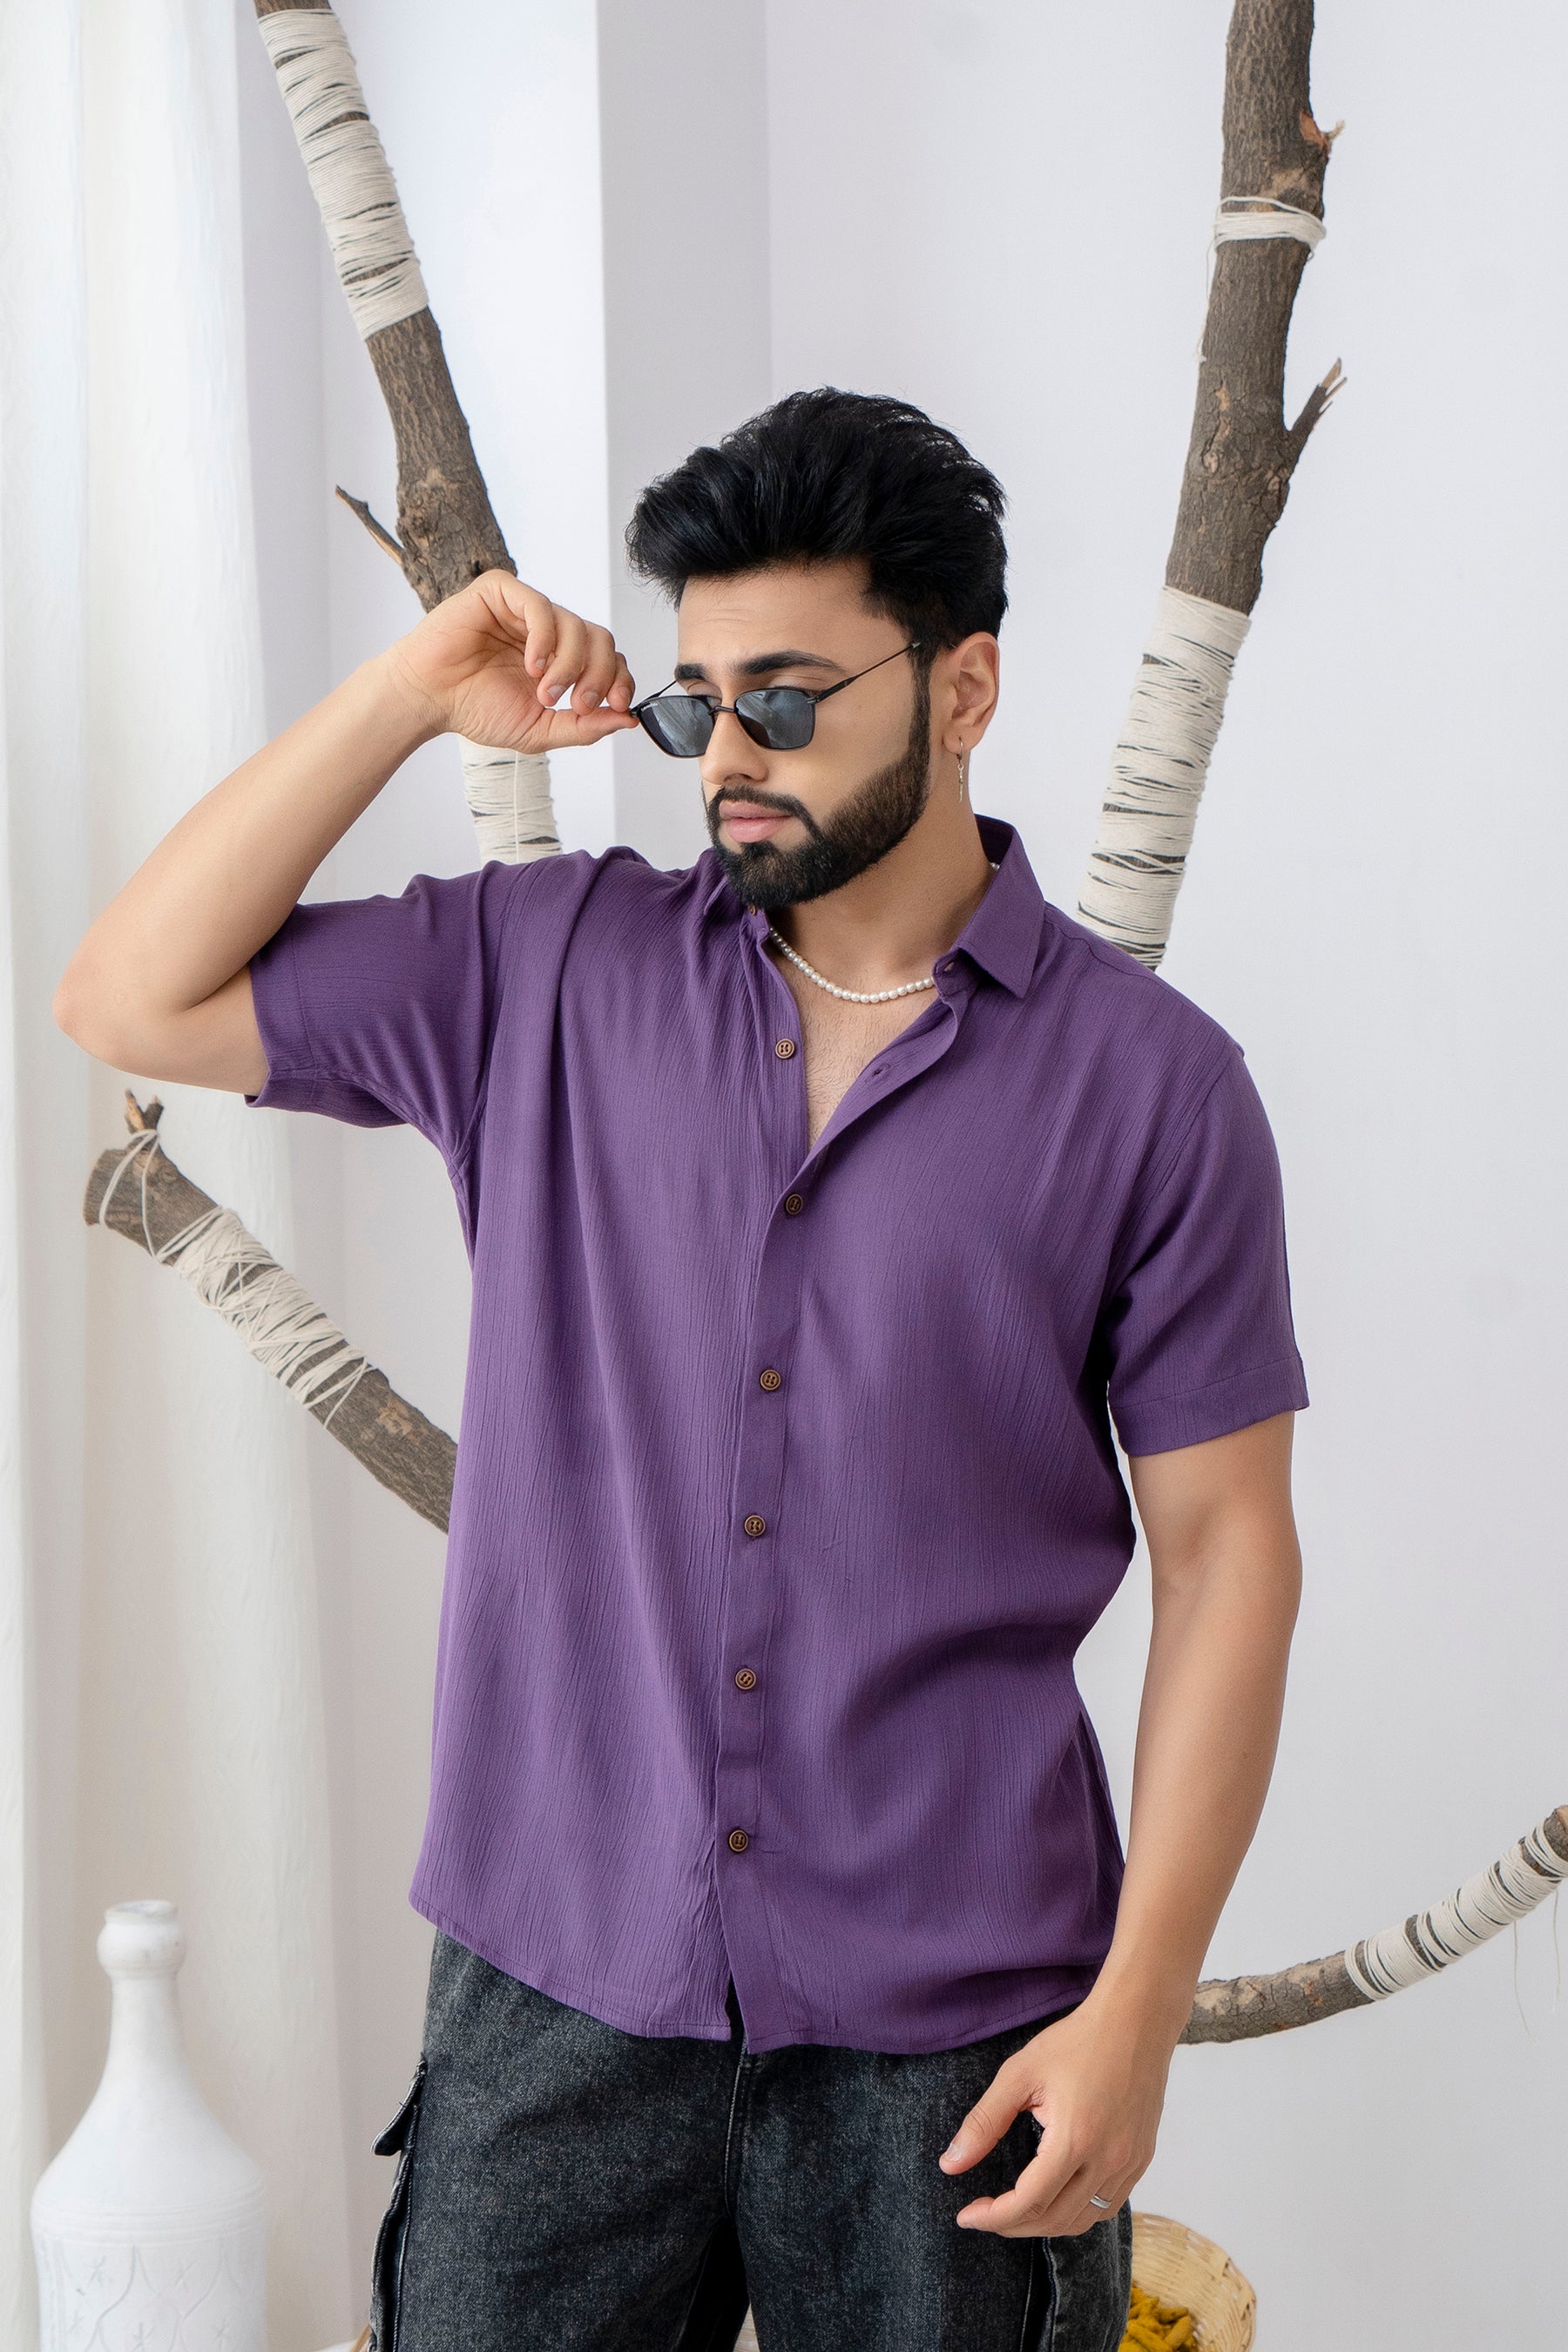 Firangi Yarn Relaxed Fit Solid Super Flowy Re-engineered Cotton- Half Sleeves Party Shirt Jamun Purple